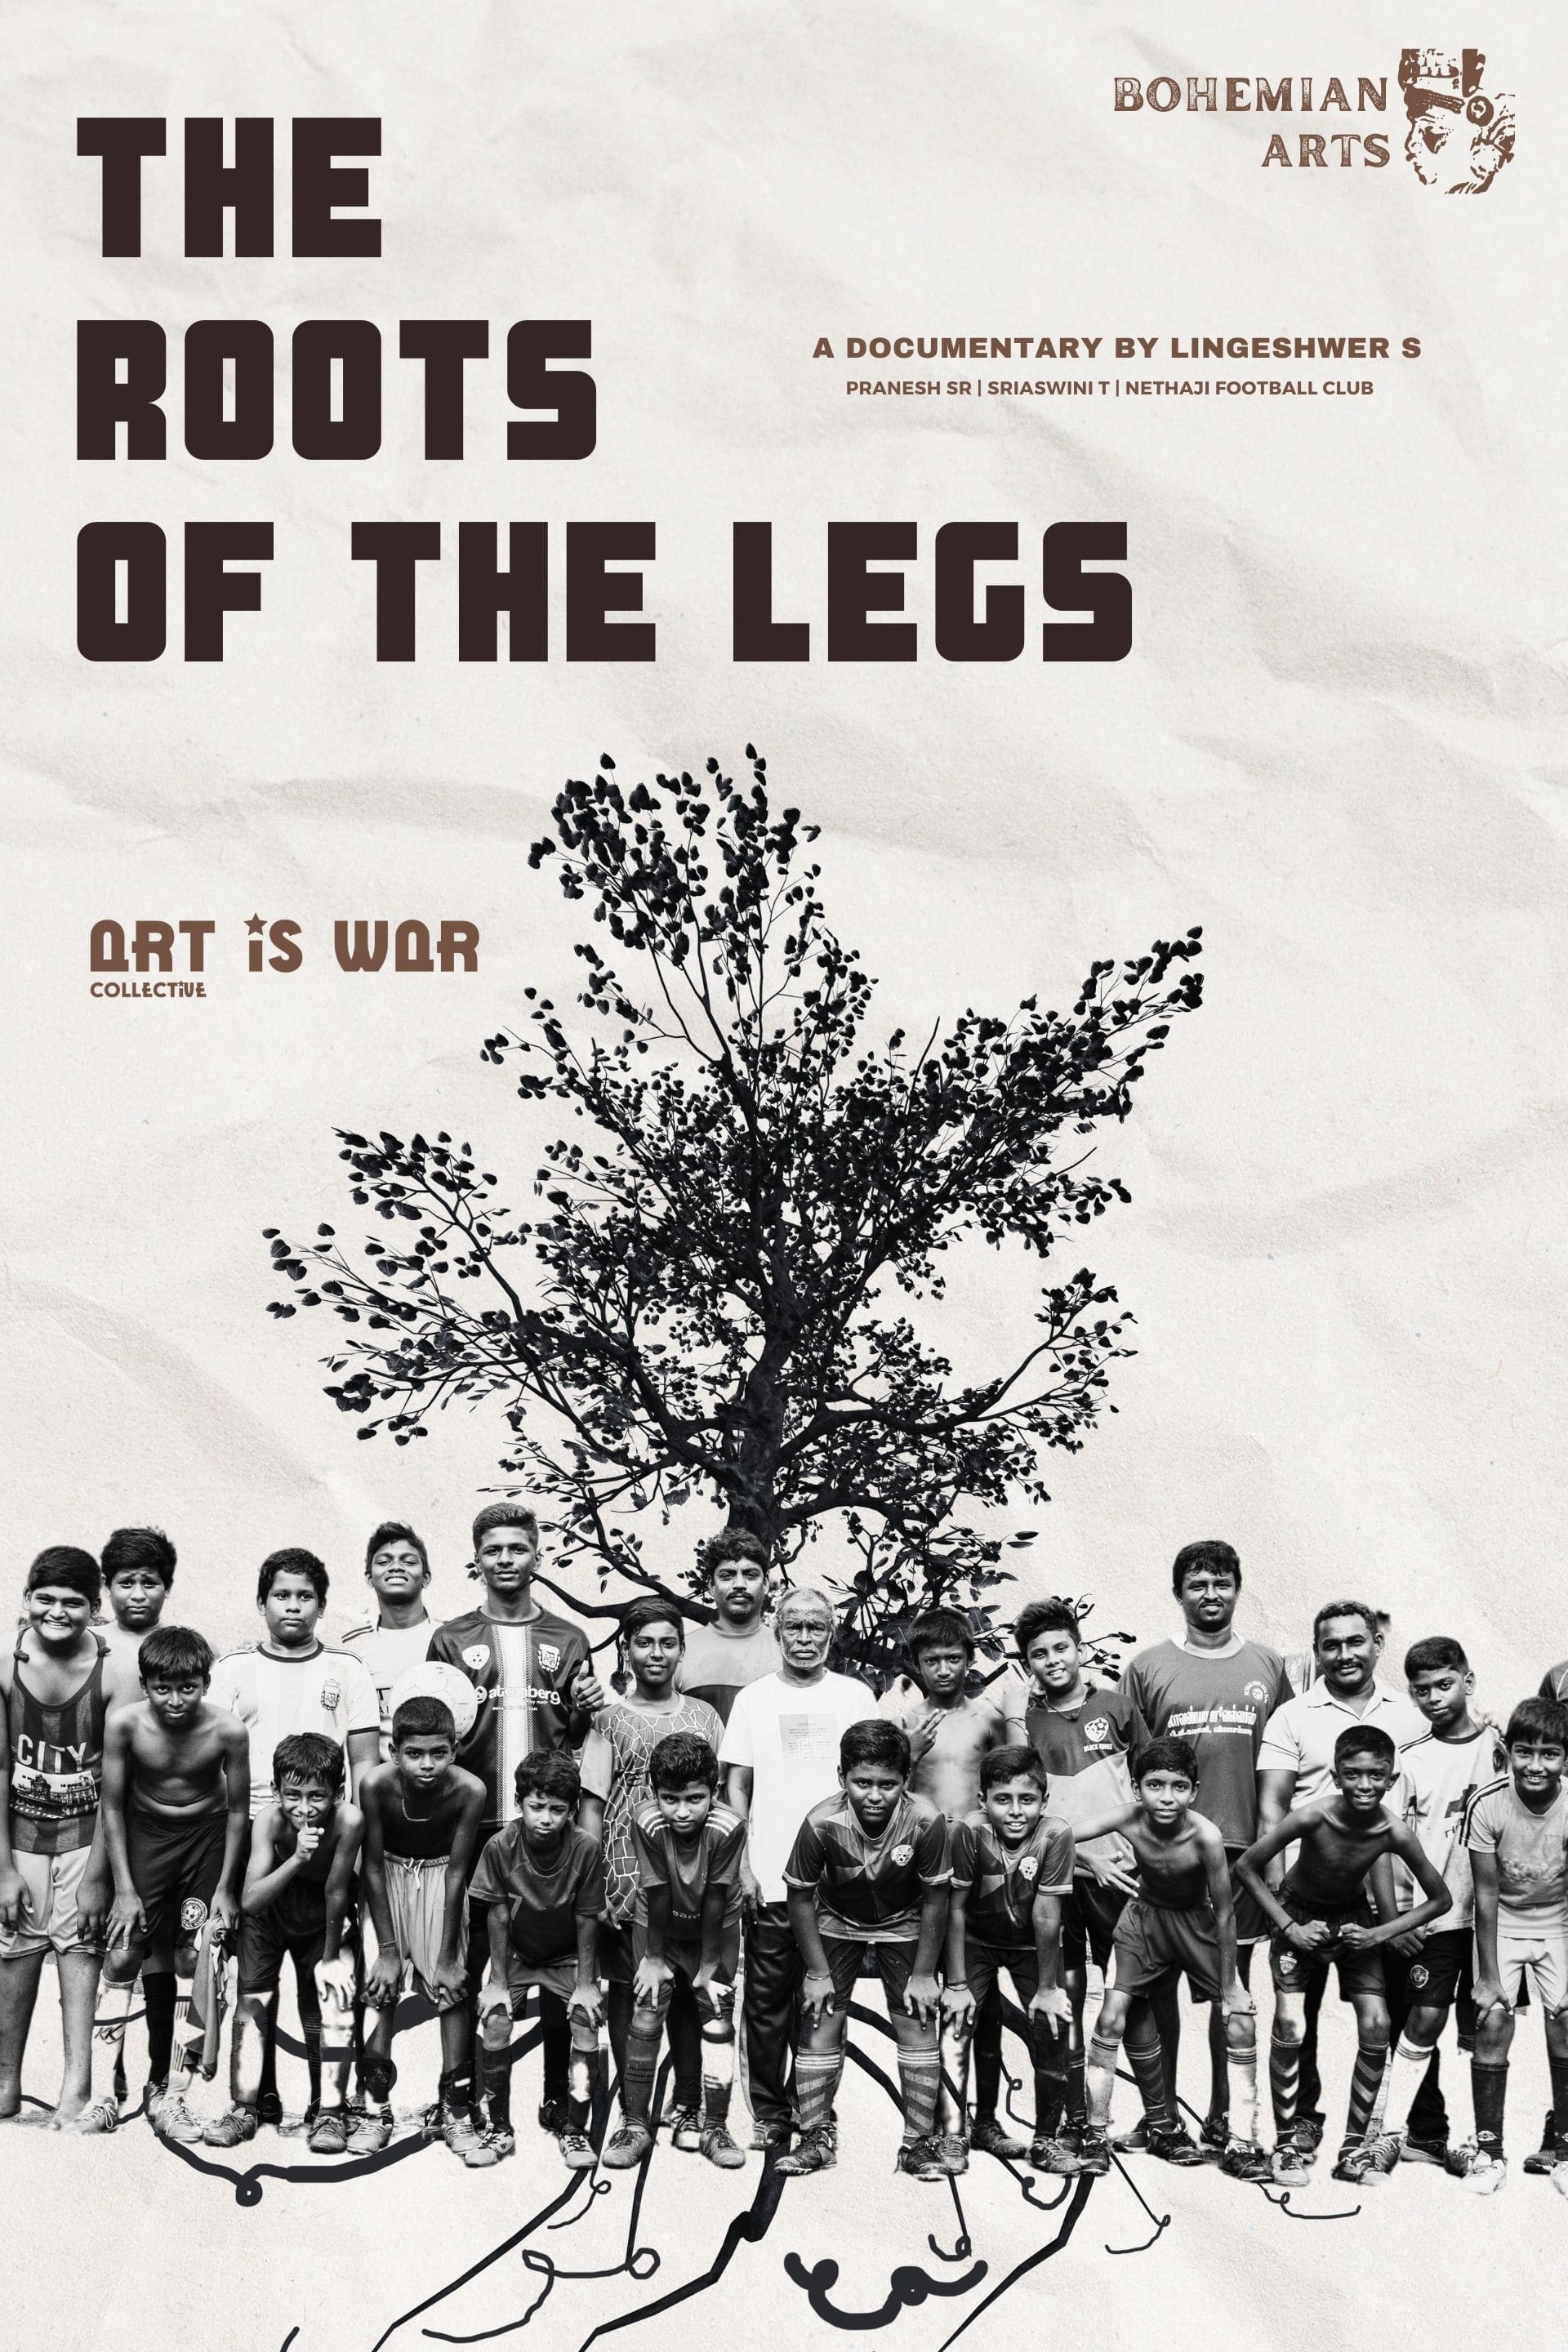 THE ROOTS OF THE LEGS